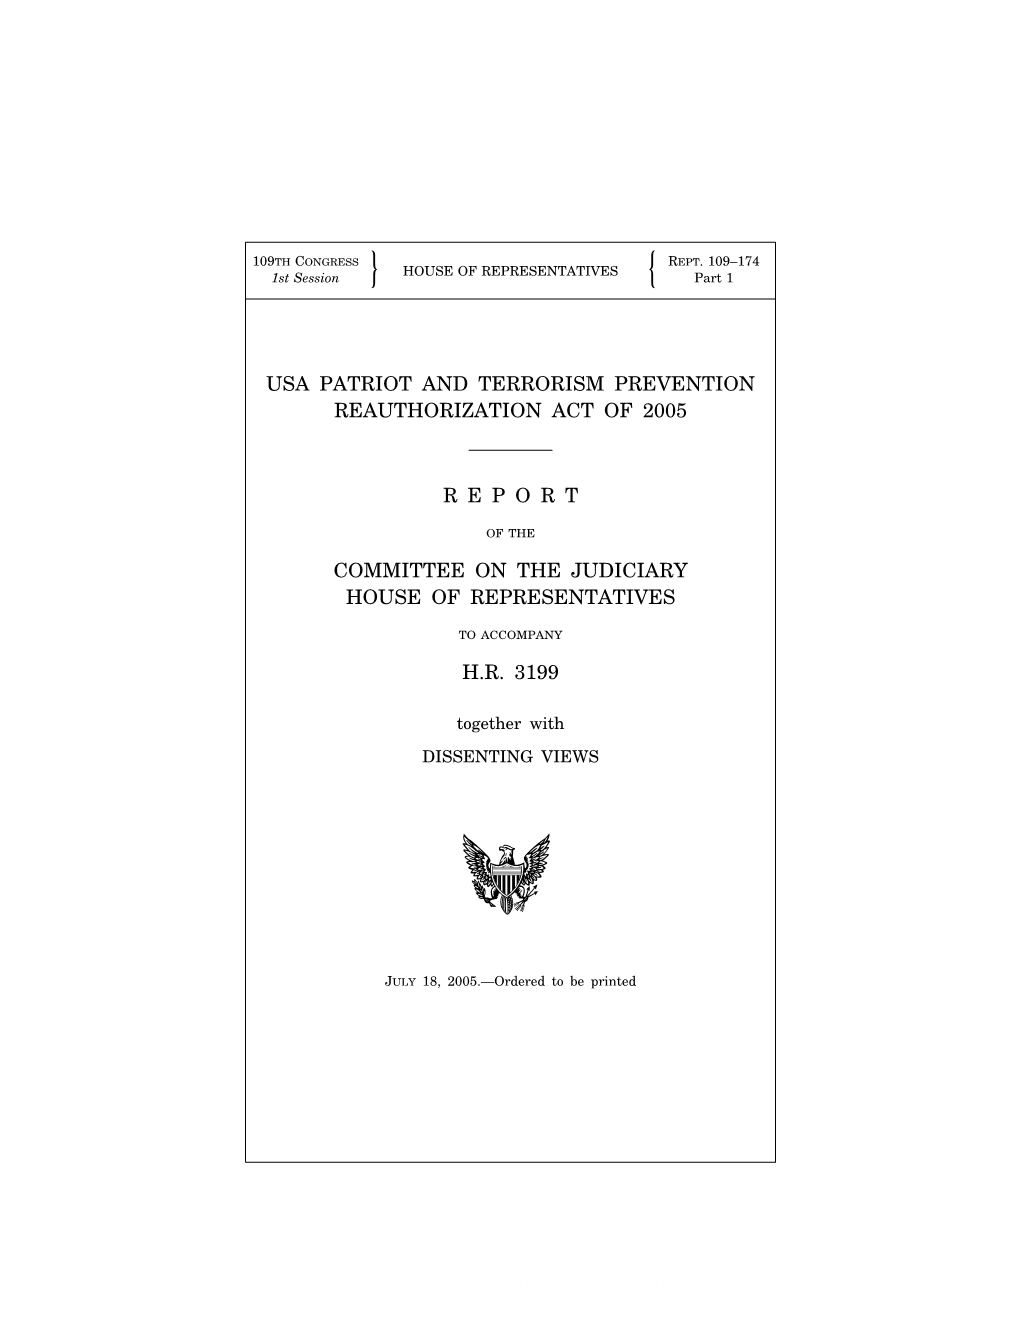 Report on USA Patriot Act Reauthorization